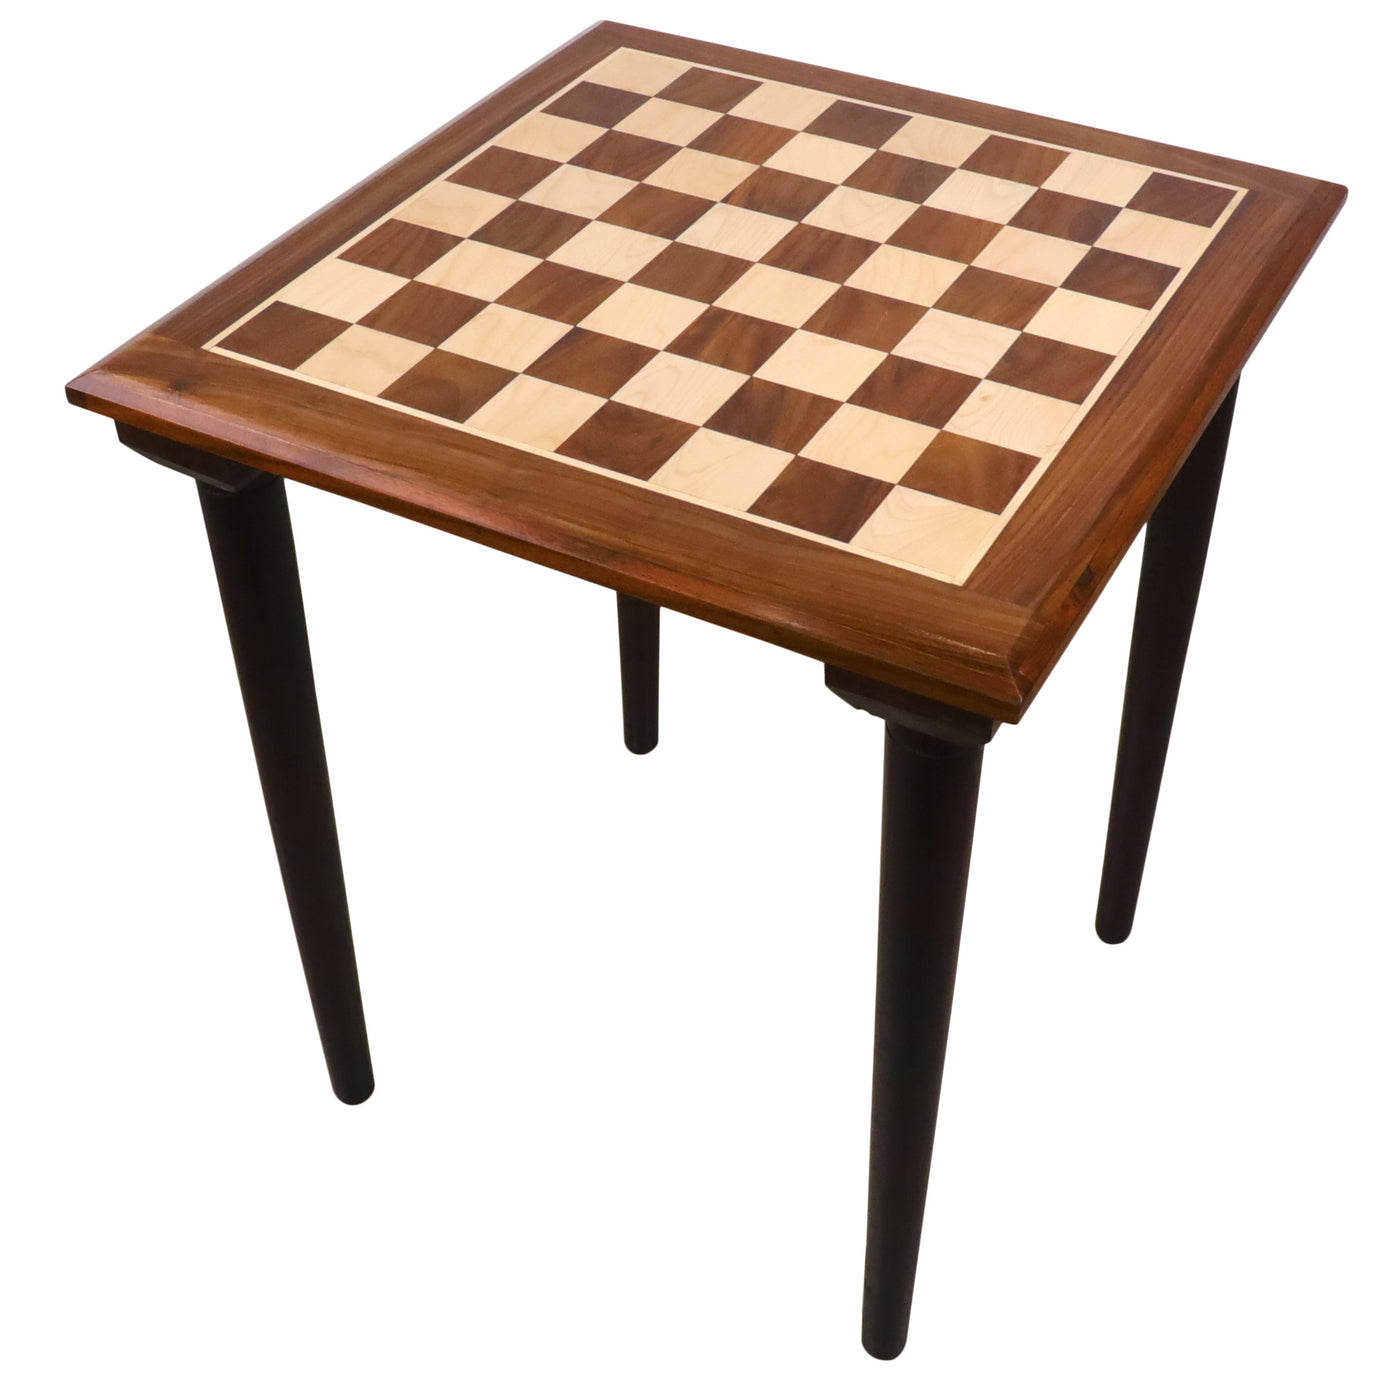 Combo of Pro Staunton Chess Pieces with 22" Wooden Tournament Chess Board Table